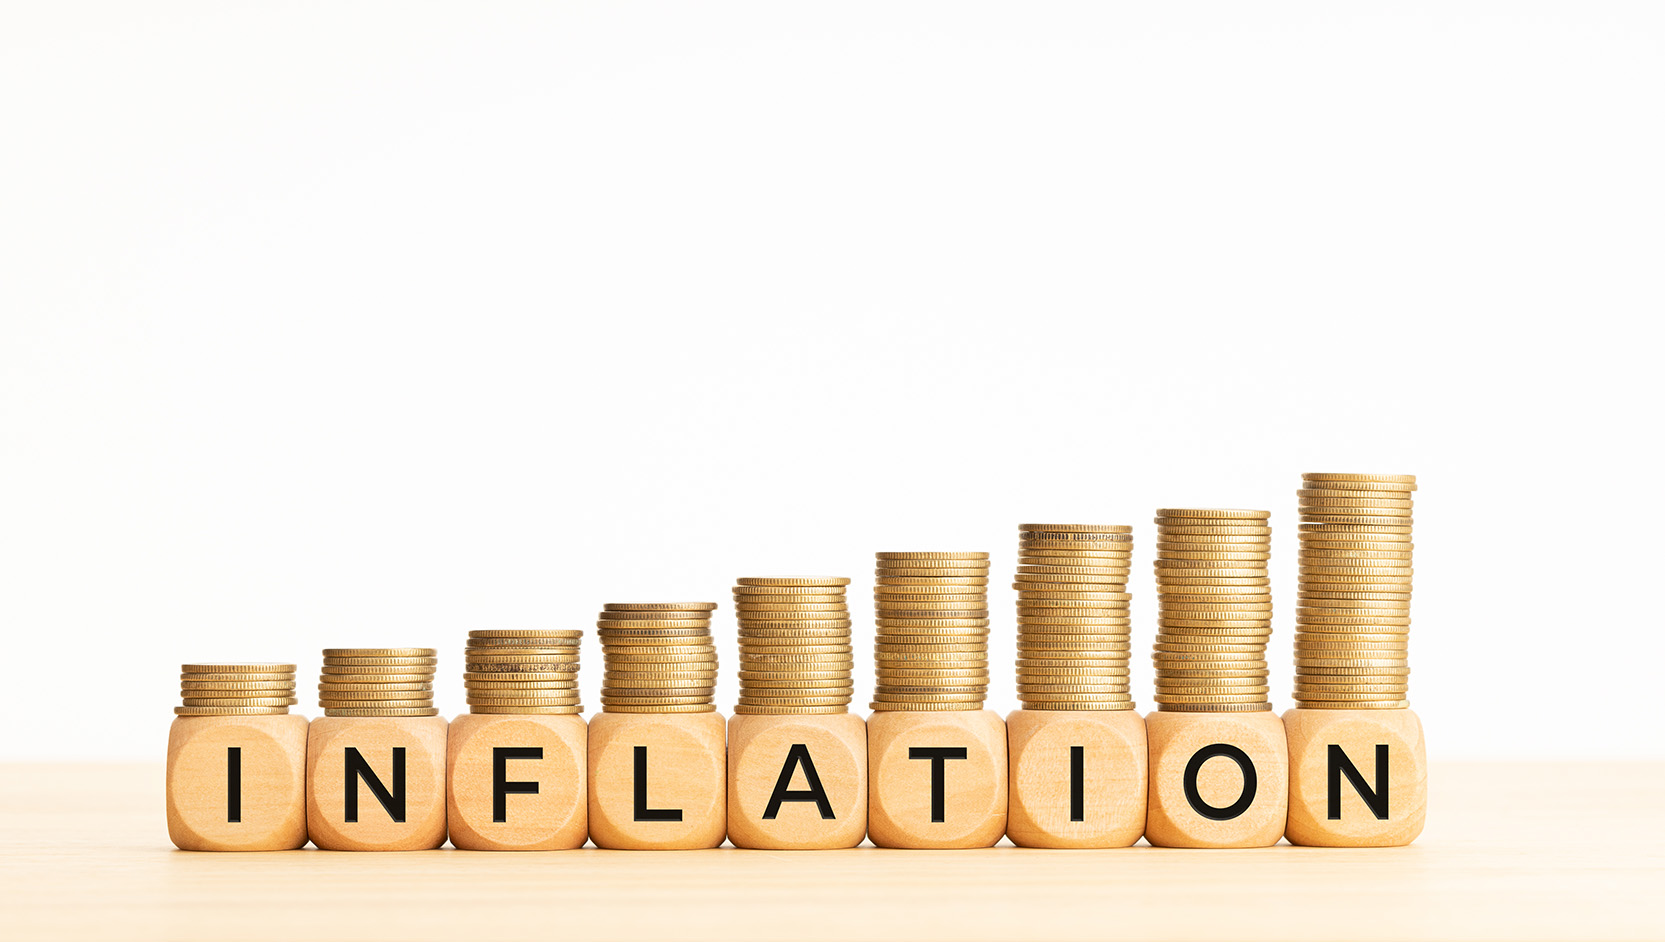 Inflation Sign in front of Stacks of Coins